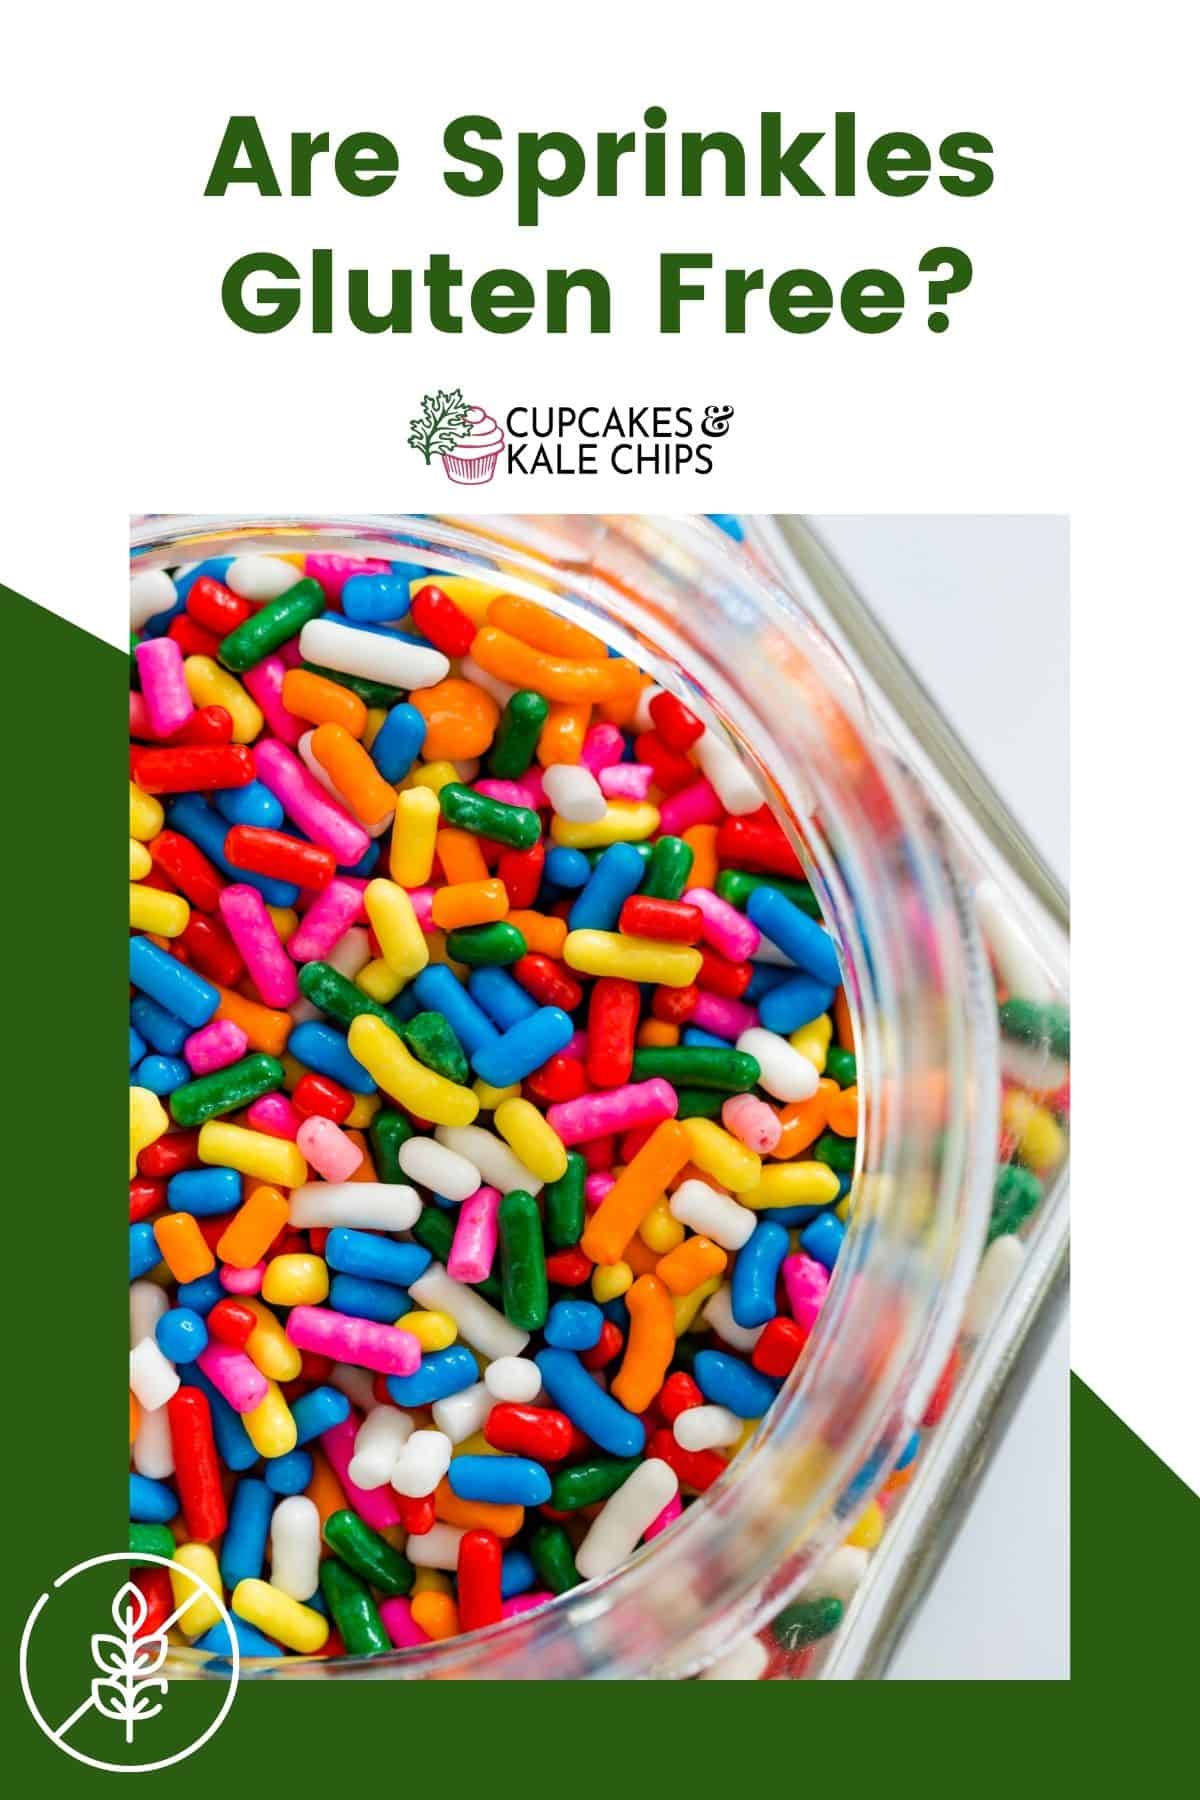 A photo looking into a jar of rainbow sprinkles on a green and white background with text that says "Are Sprinkles Gluten Free?"